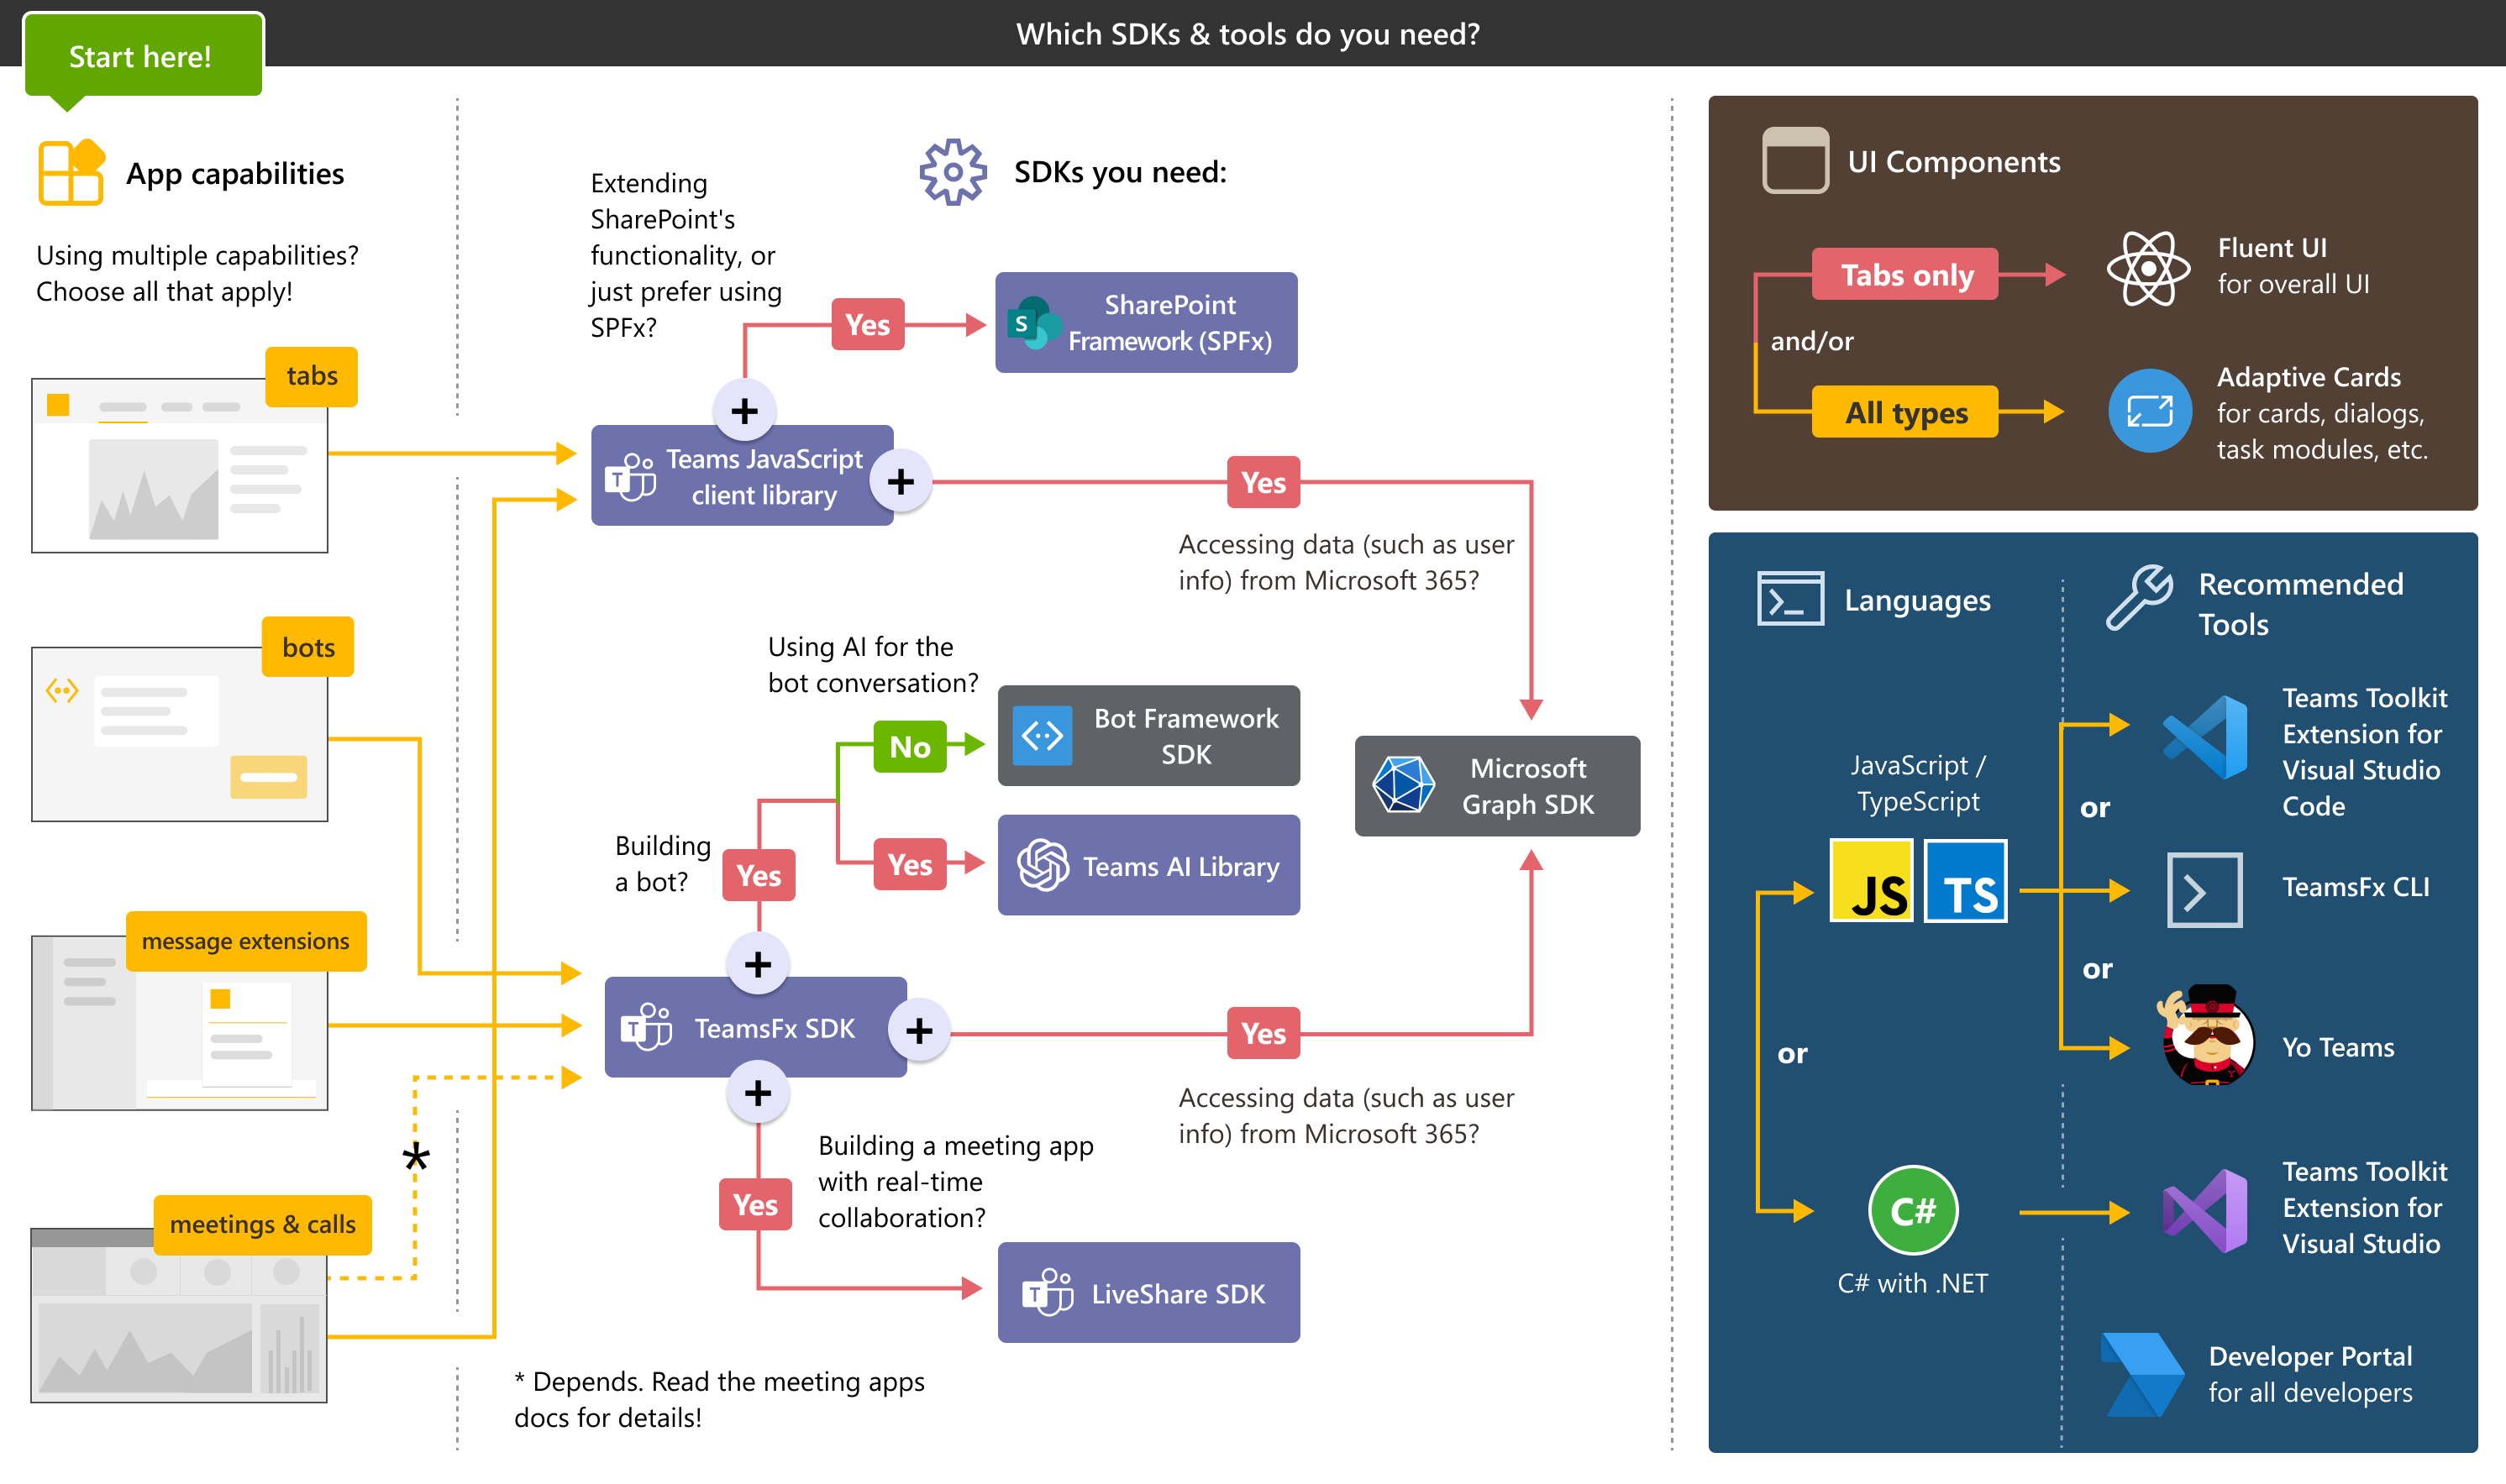 Flow chart shows you the SDKs and tools you need to build your Teams app.